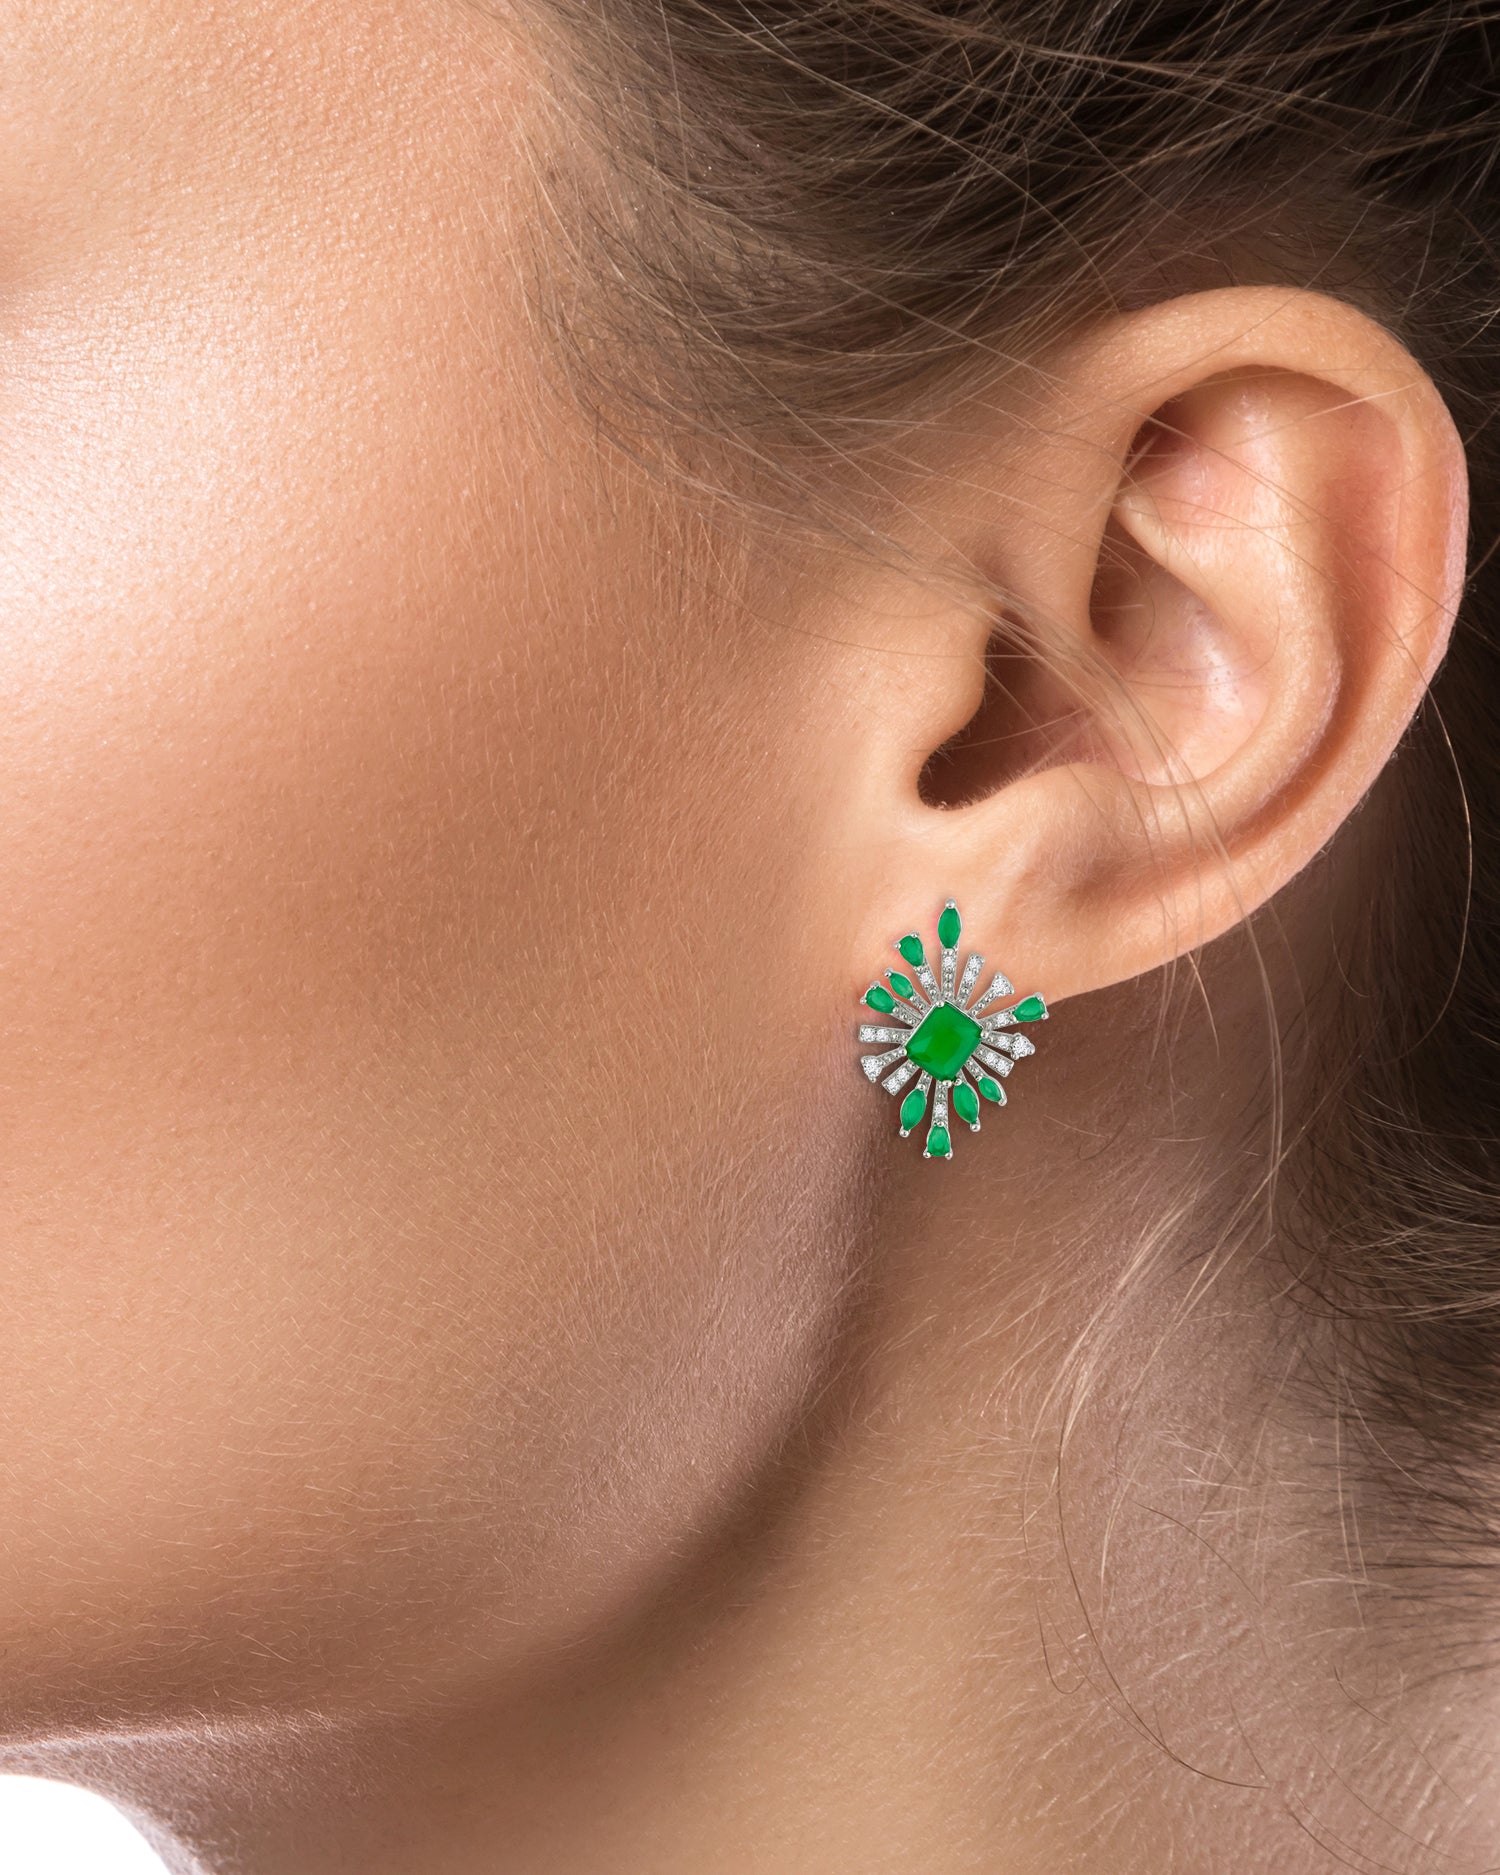 Emerald and Pave Burst Earrings